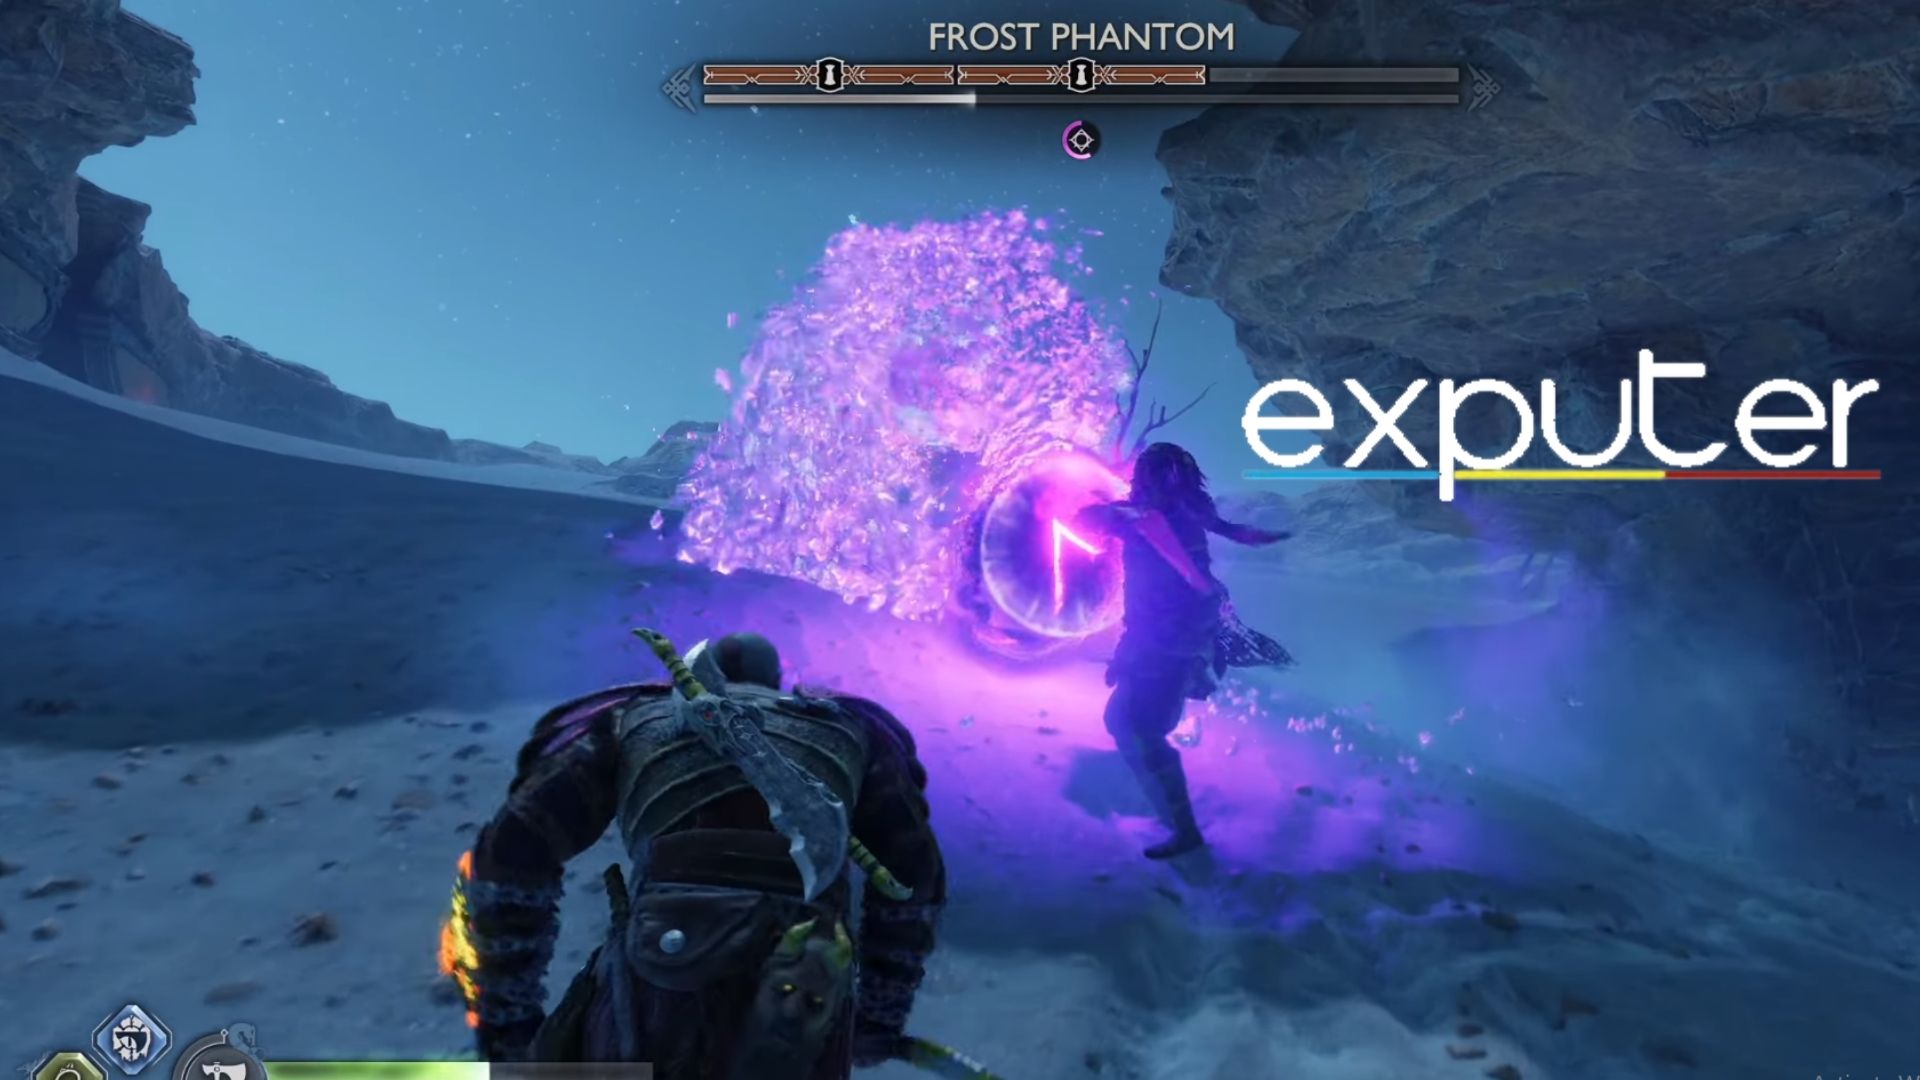 The Frost Phantom In GOWR